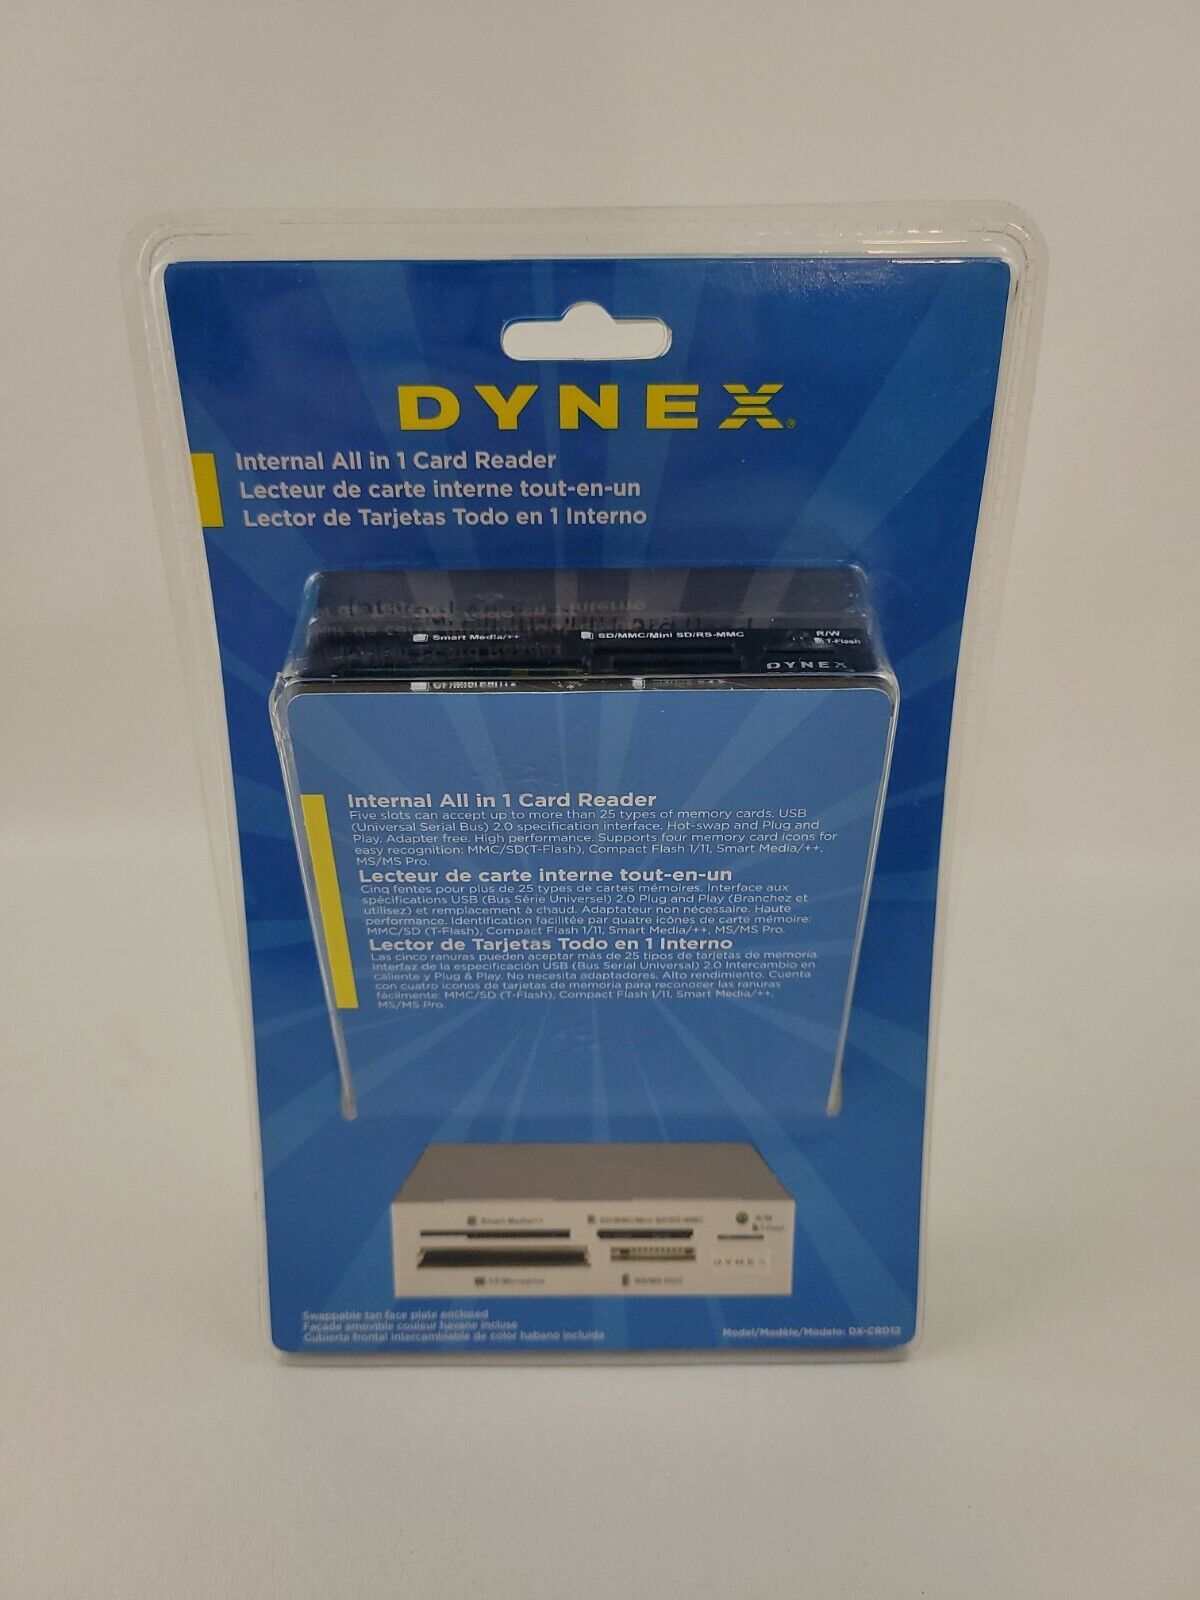 Dynex DX-CRD12 Internal All In 1 Card Reader -Five Memory Card Slots - Brand New